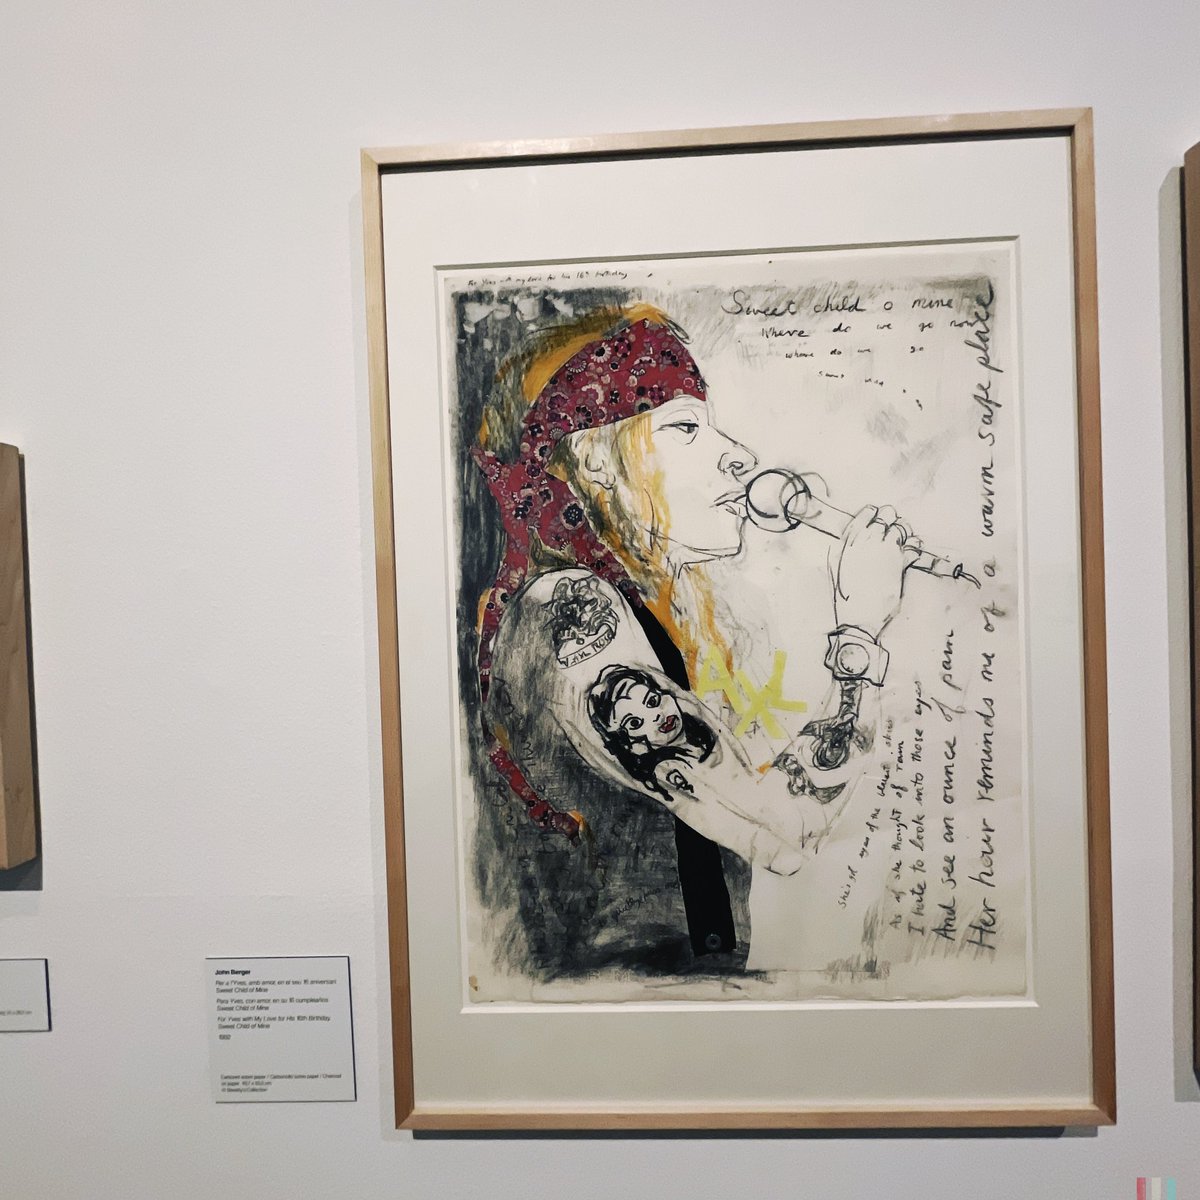 Of possible interest to @egabbert, @JamCharlesworth, & @marchxness: portraits of Axl & Slash by John Berger, spotted at the Permanent Red exhibition in Barcelona. https://t.co/jZ94tBnJ0j